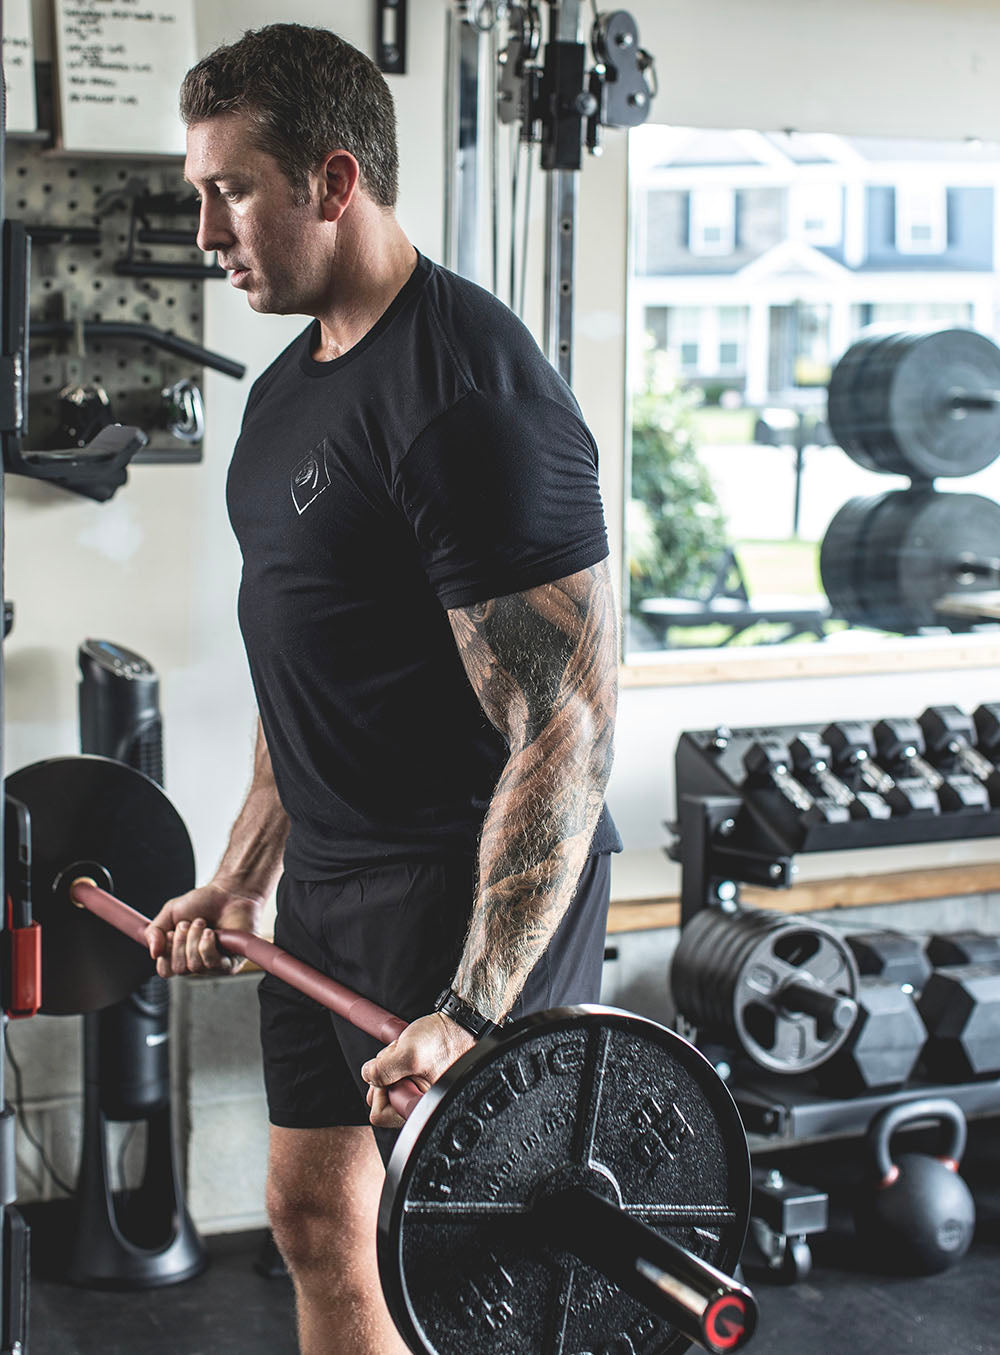 The Edge Bar is a mix between a shortened cambered bar and an EZ Bar. Perfect for enhanced bicep workouts, chest workouts, and more. This image presents the Edge Rackable Cambered Bar being used for a bicep workout.